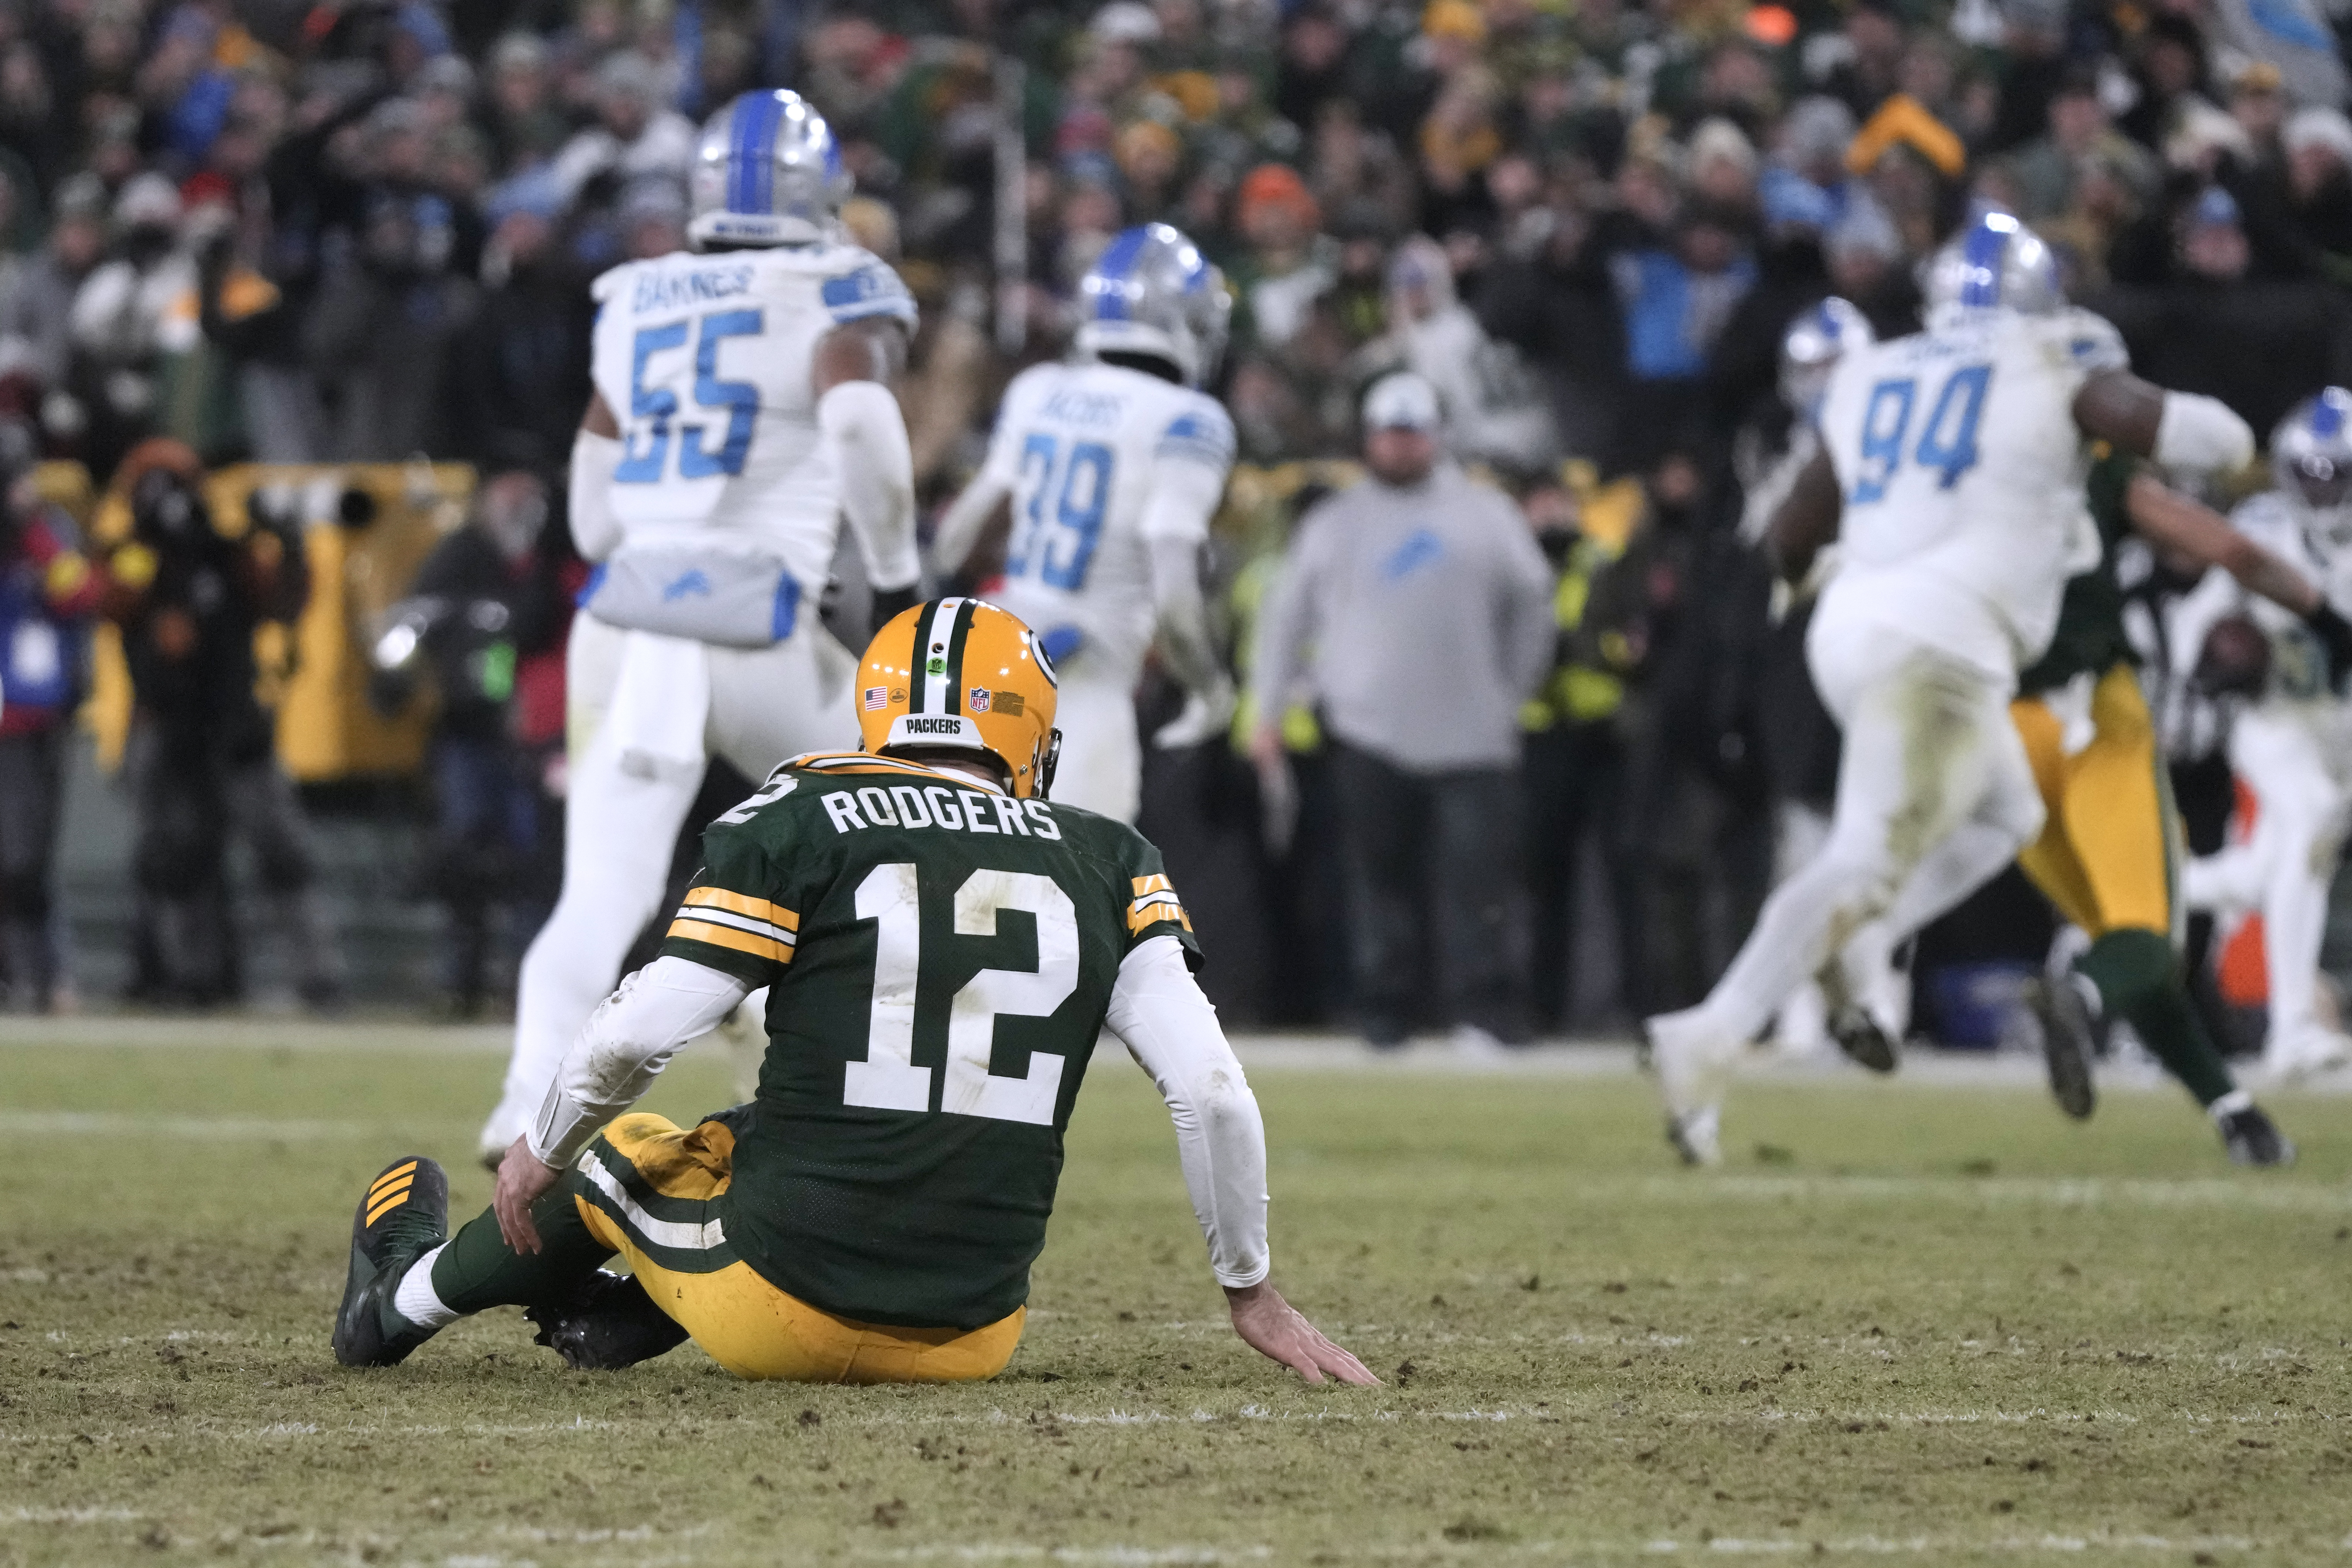 End of the line for Aaron Rodgers? Packers lose to Lions, miss playoffs